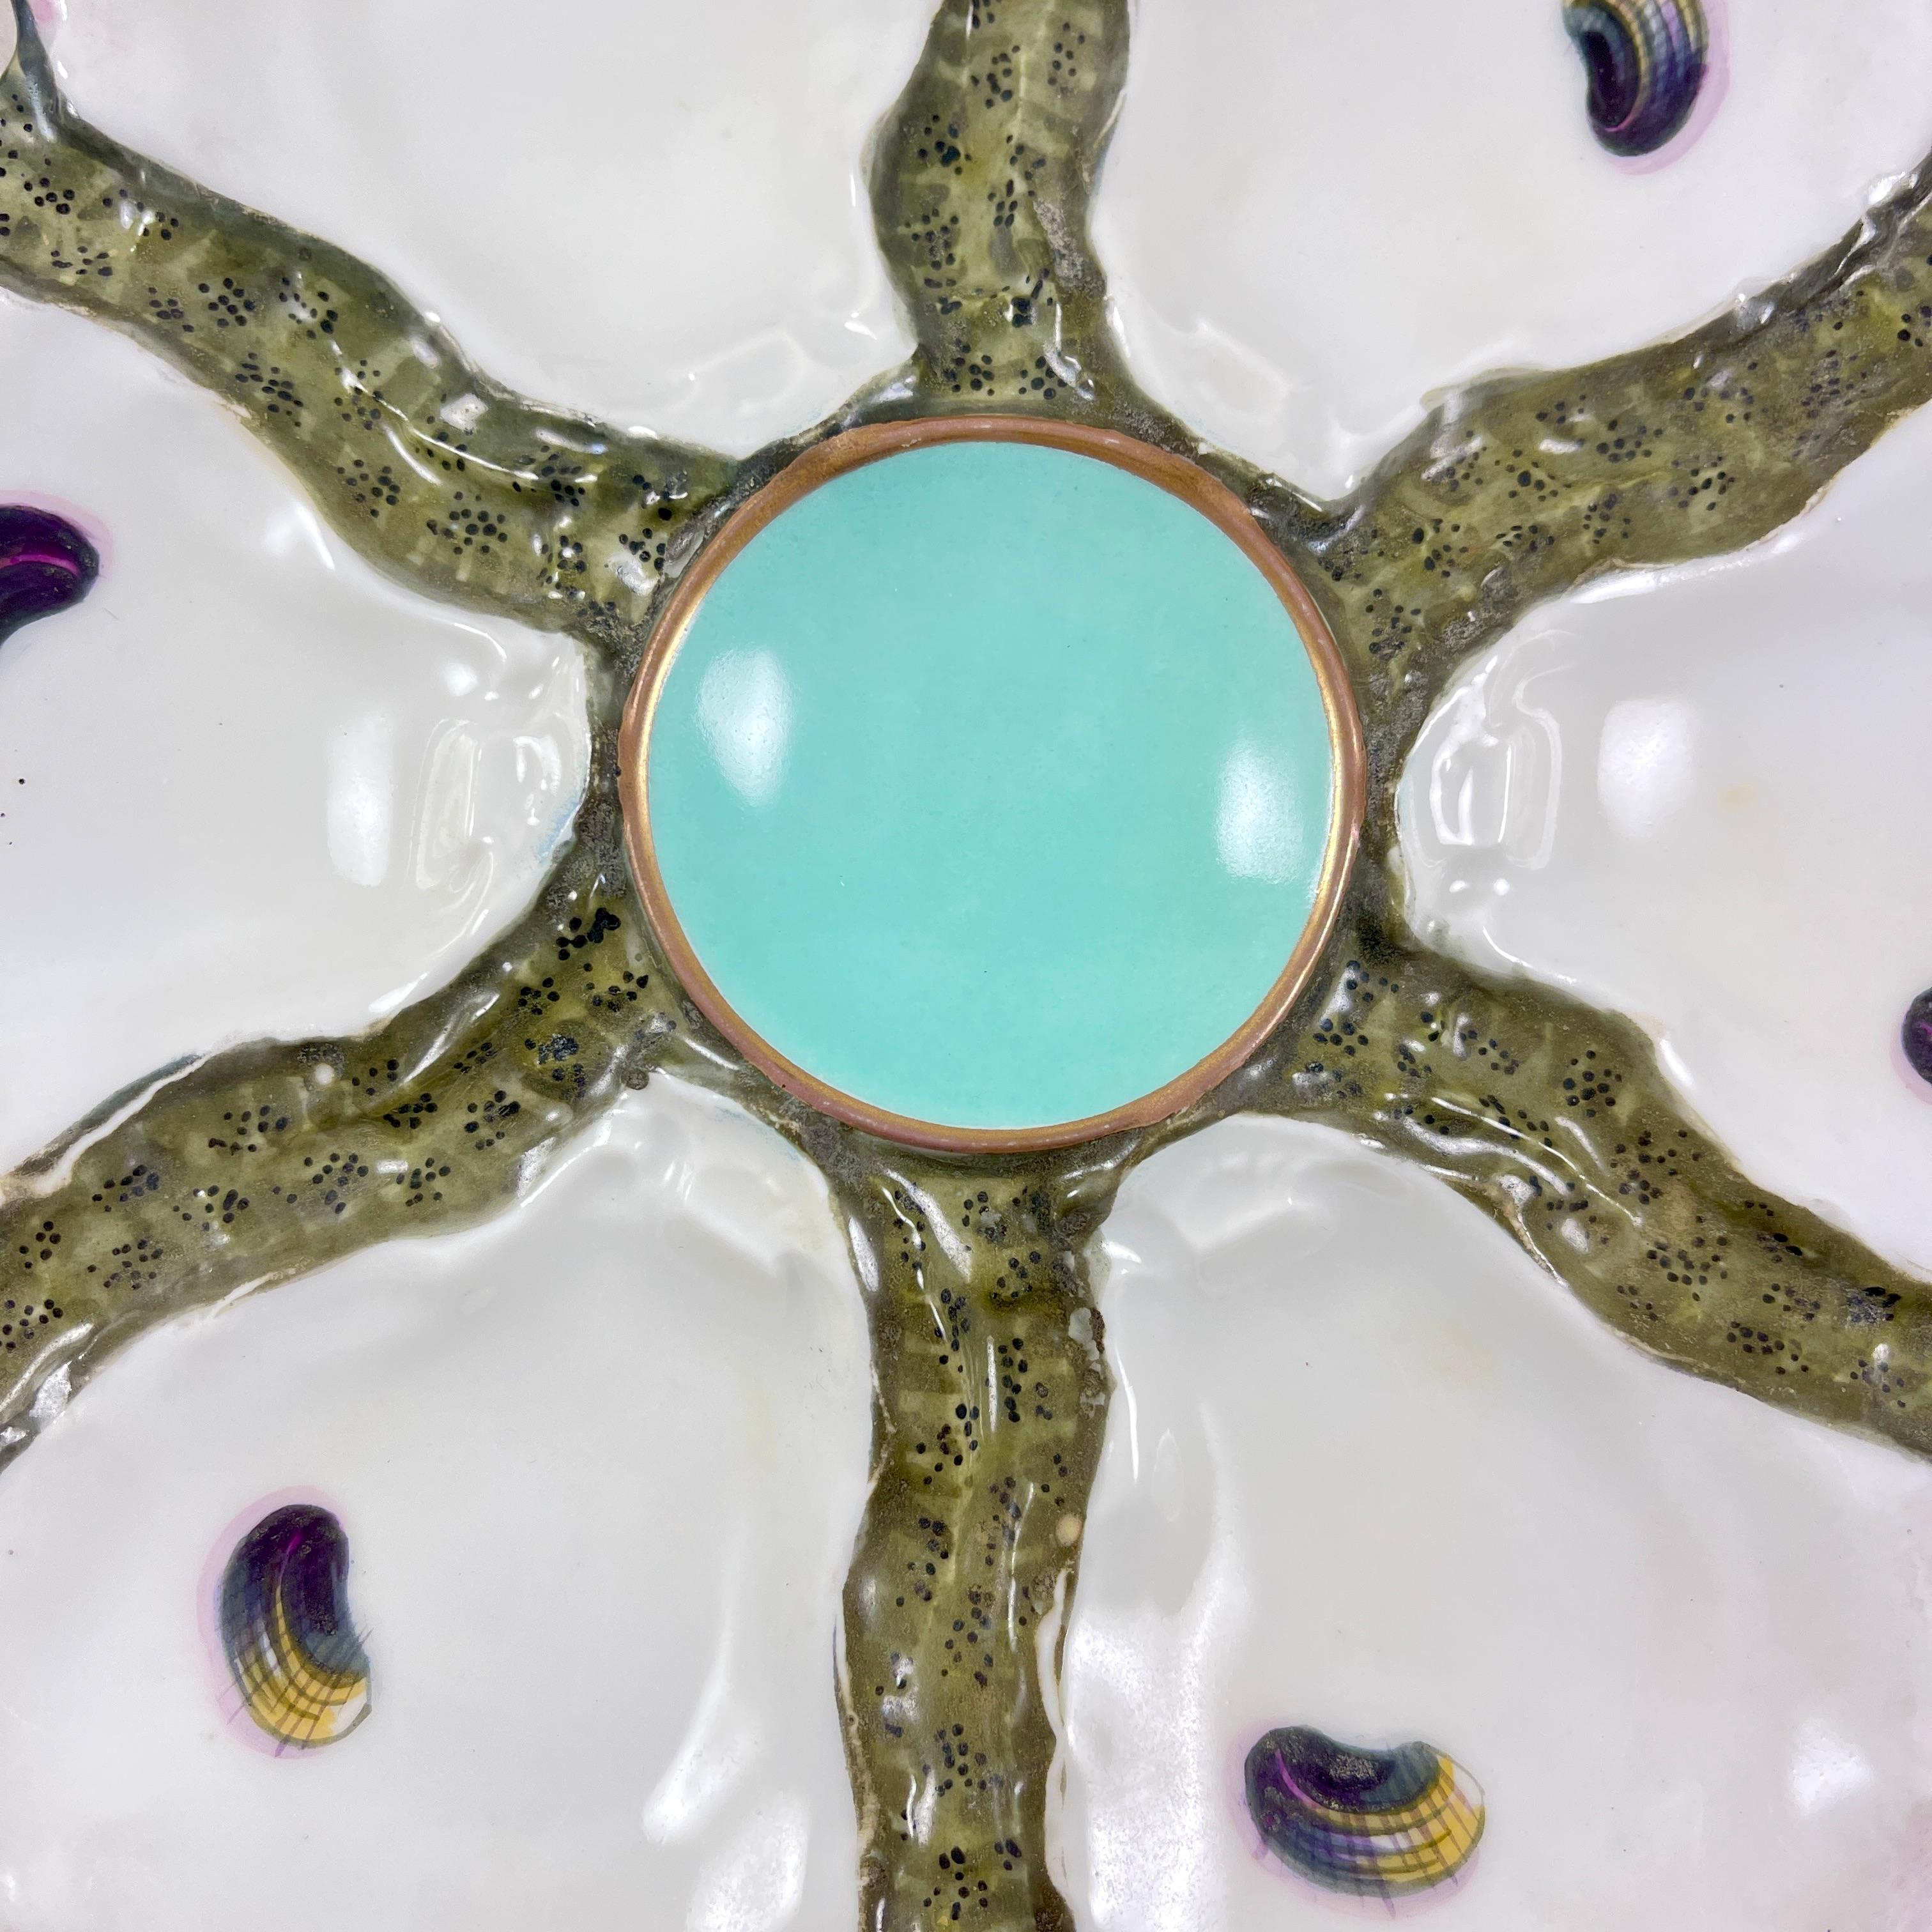 Aesthetic Movement French Porcelain 6-Well Oyster Plate, c.1890 For Sale